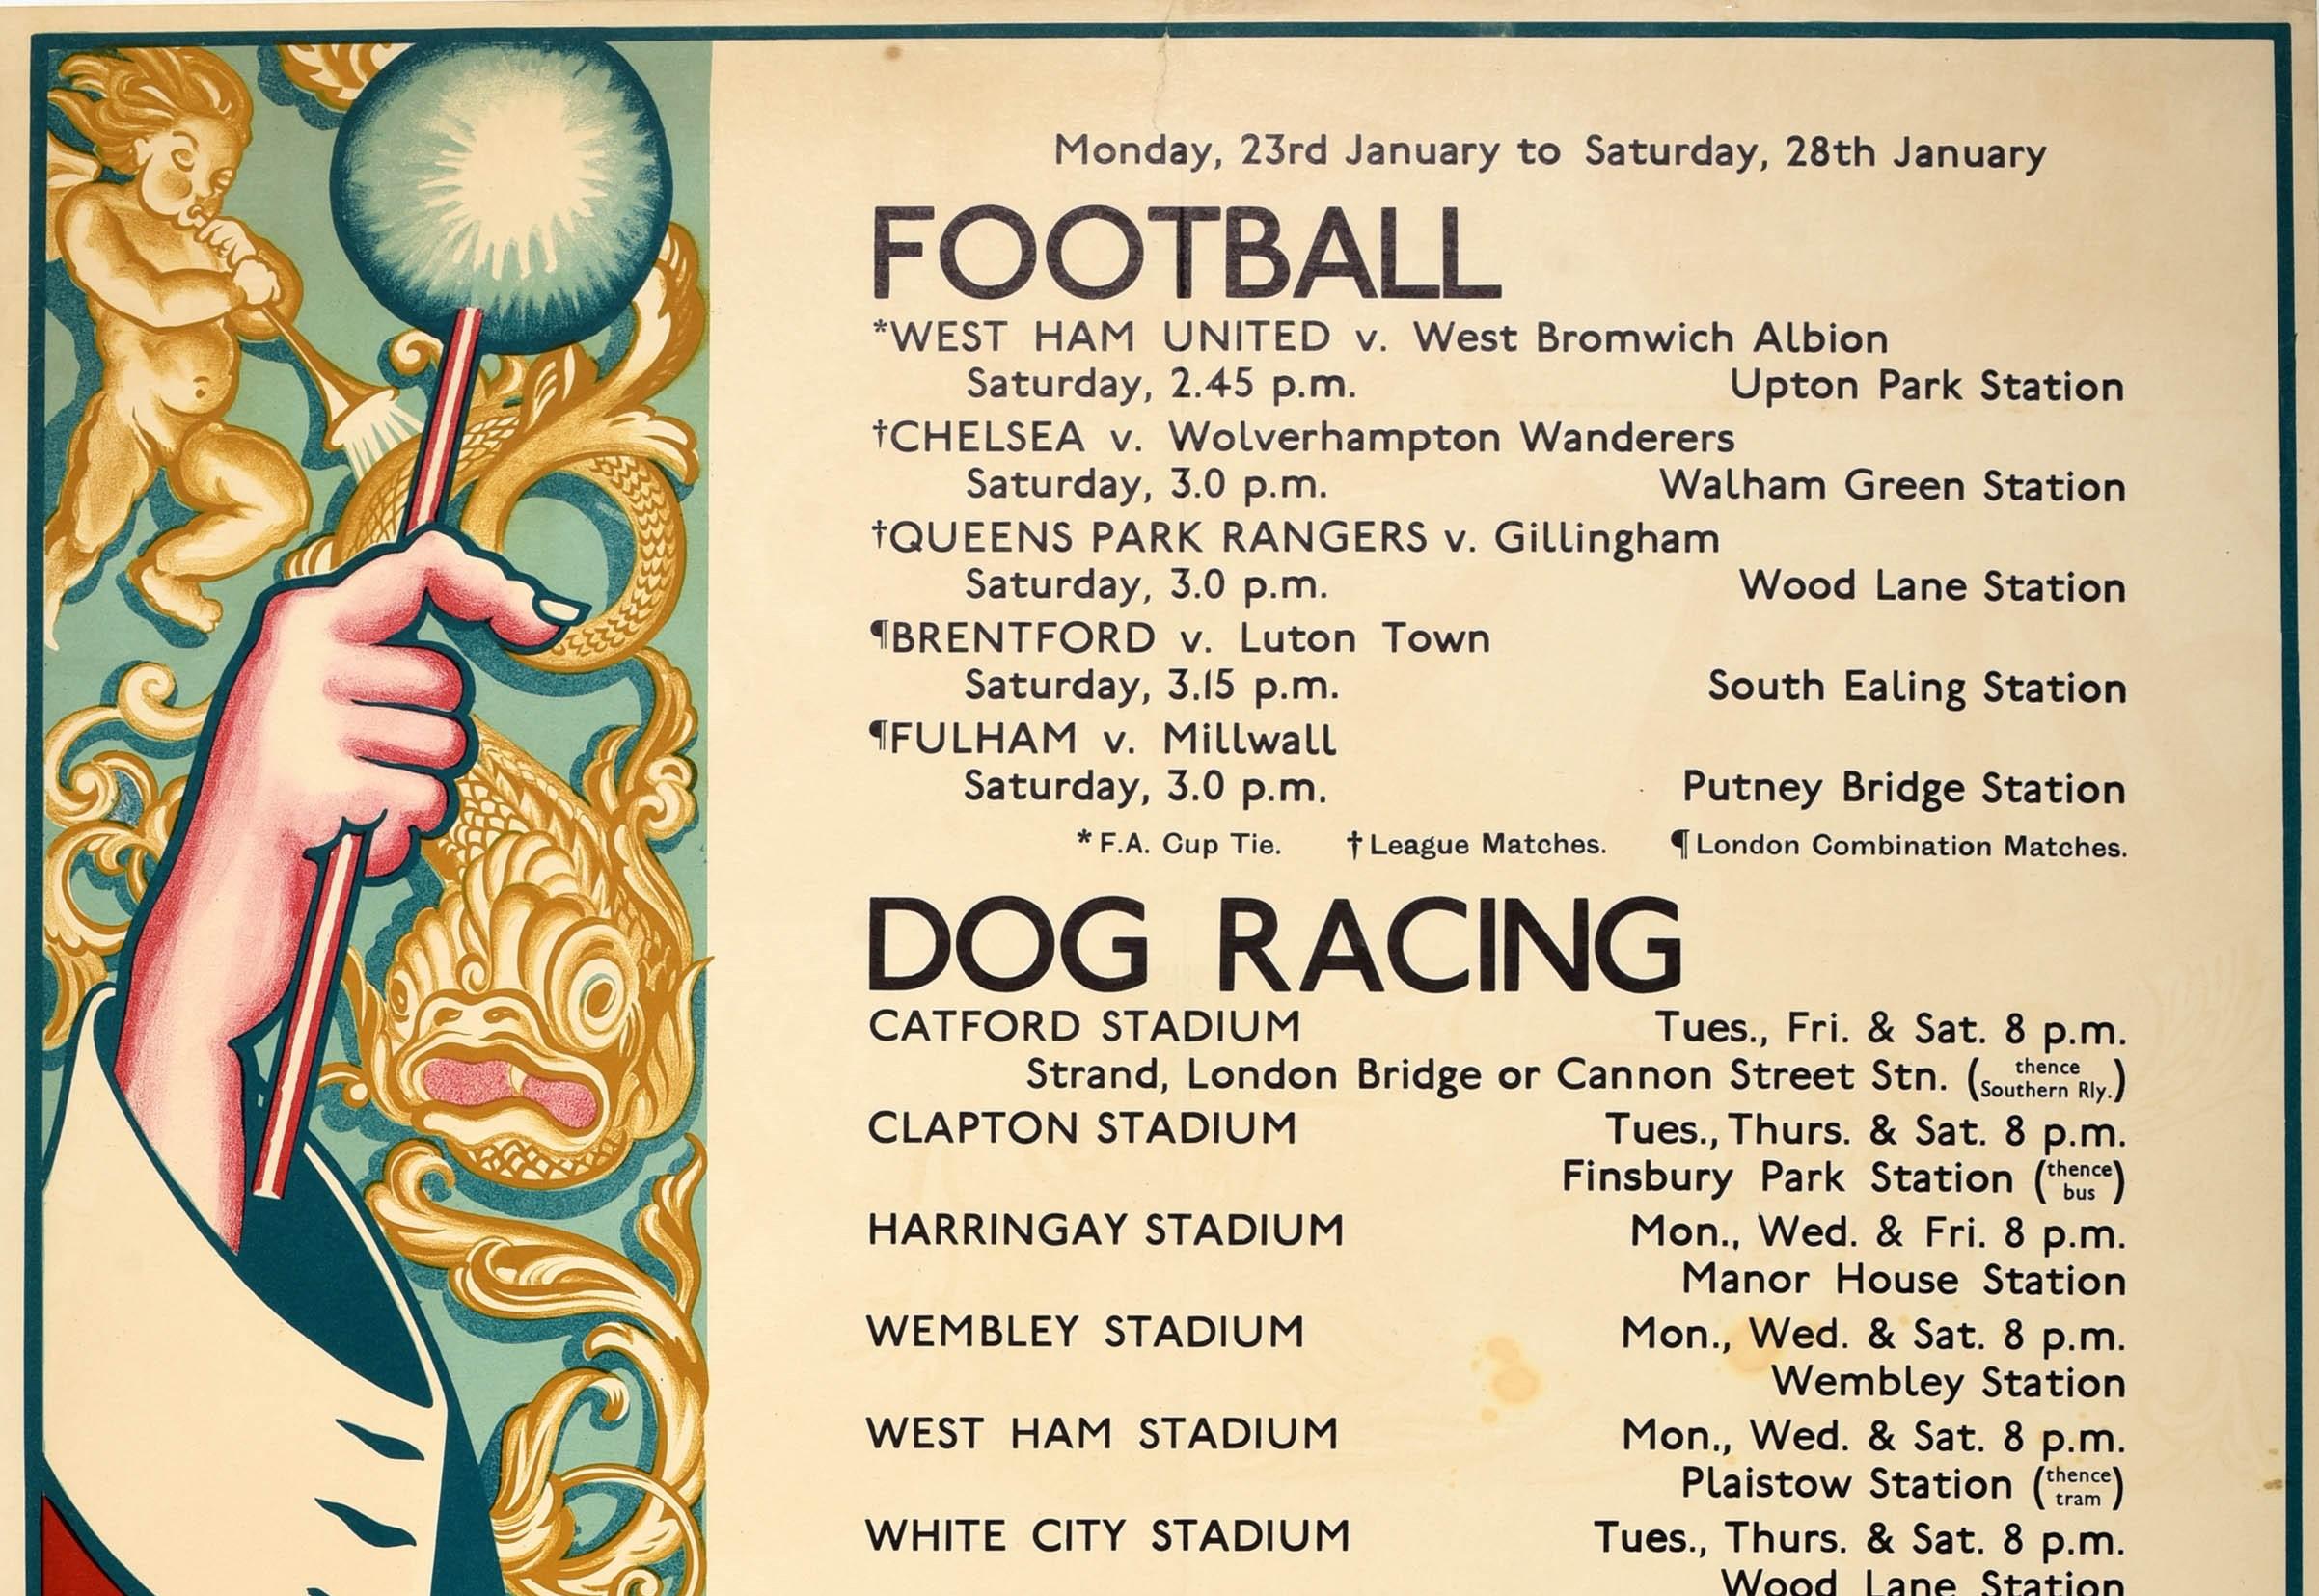 Original vintage London Transport poster promoting sport events from Monday 23 to Saturday 28 January with the London Underground and bus services to football matches (FA Cup Tie League and London Combination), dog racing and rugby matches with a